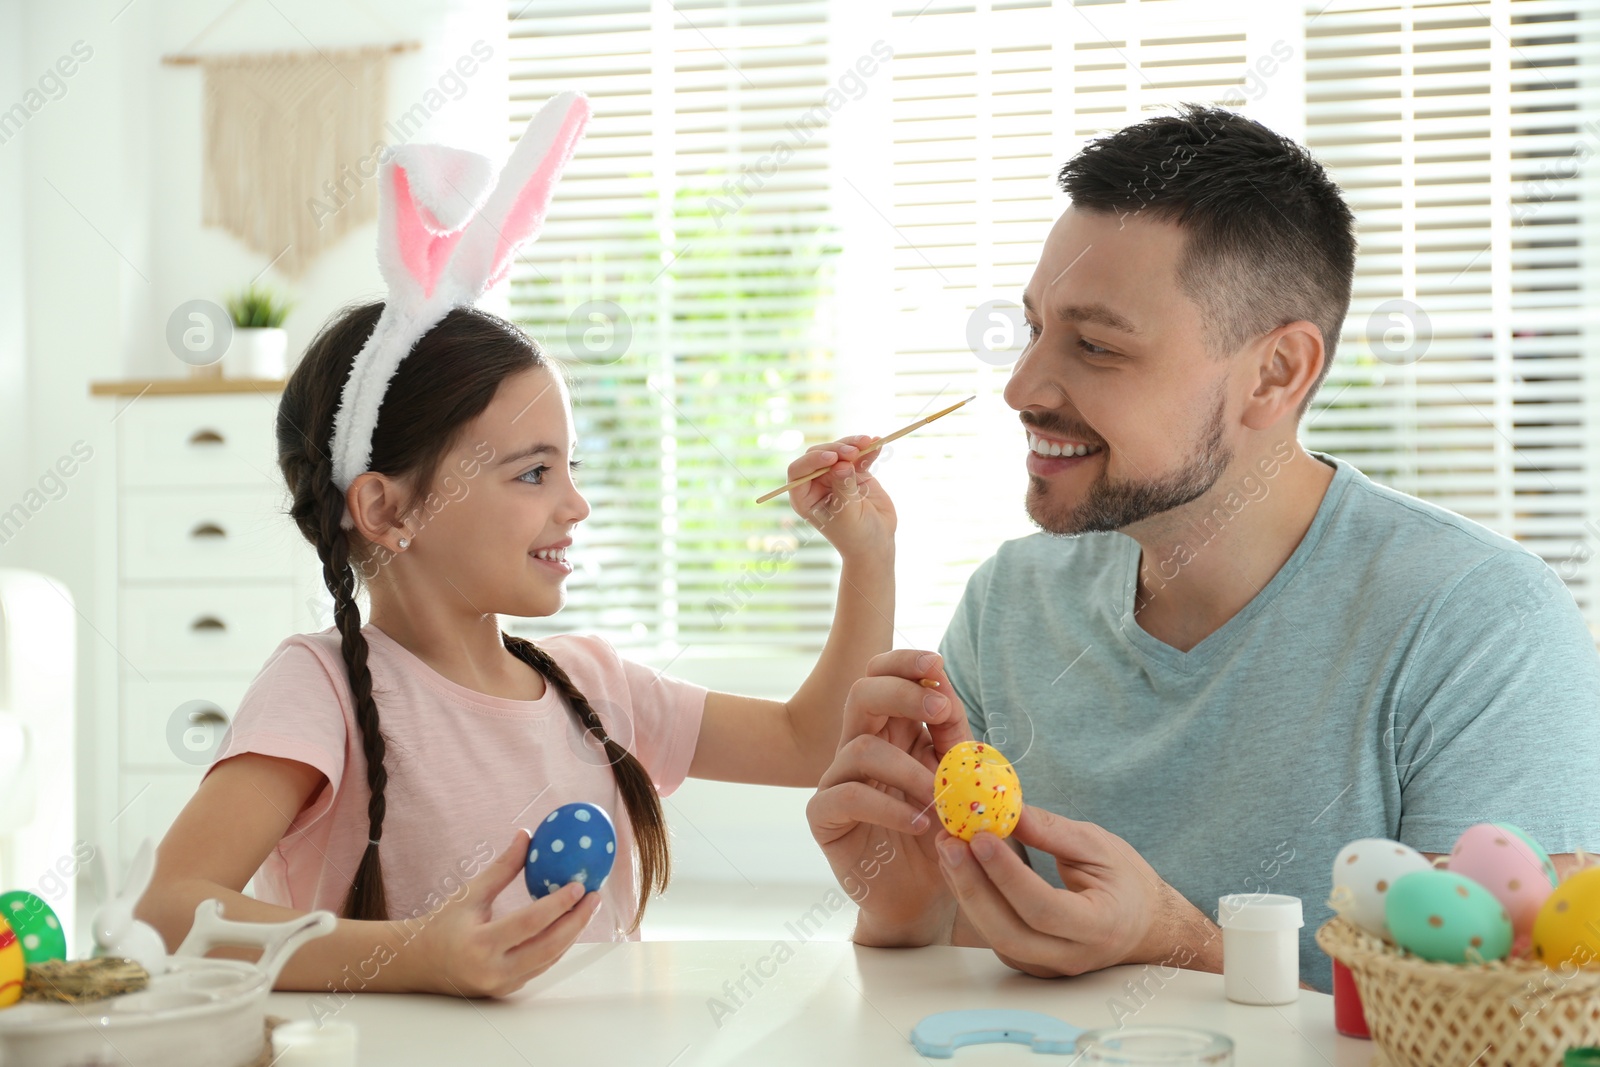 Photo of Happy daughter with bunny ears headband and her father having fun while painting Easter eggs at home